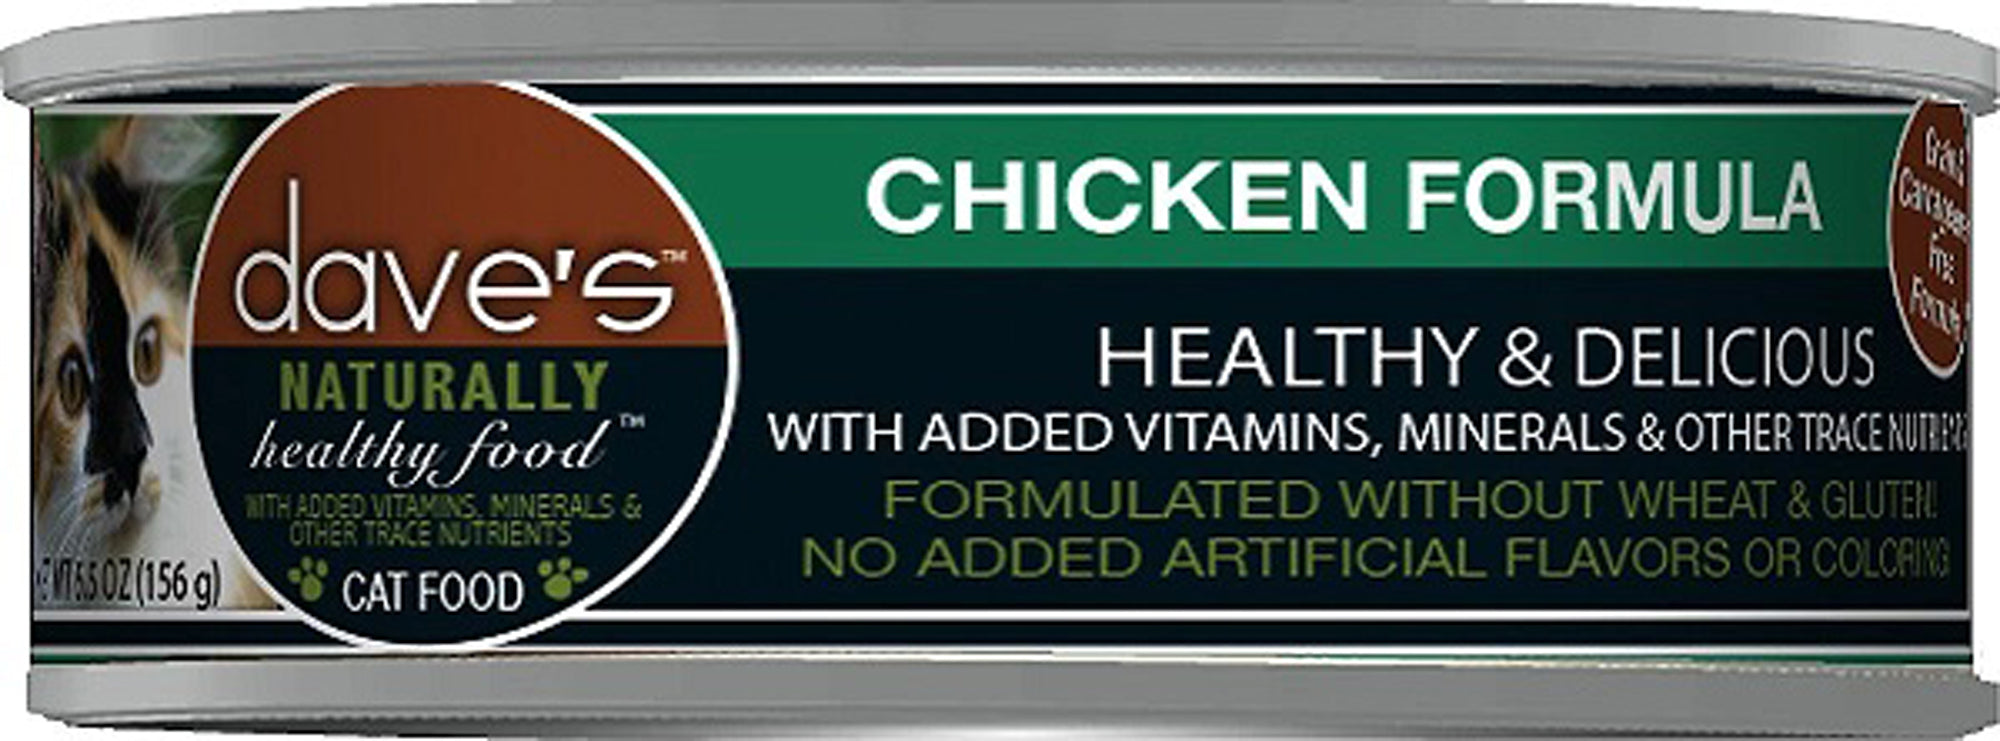 Dave's Pet Food Naturally Healthy Grain Free Chicken Formula 5.5oz. (Case Of 24)